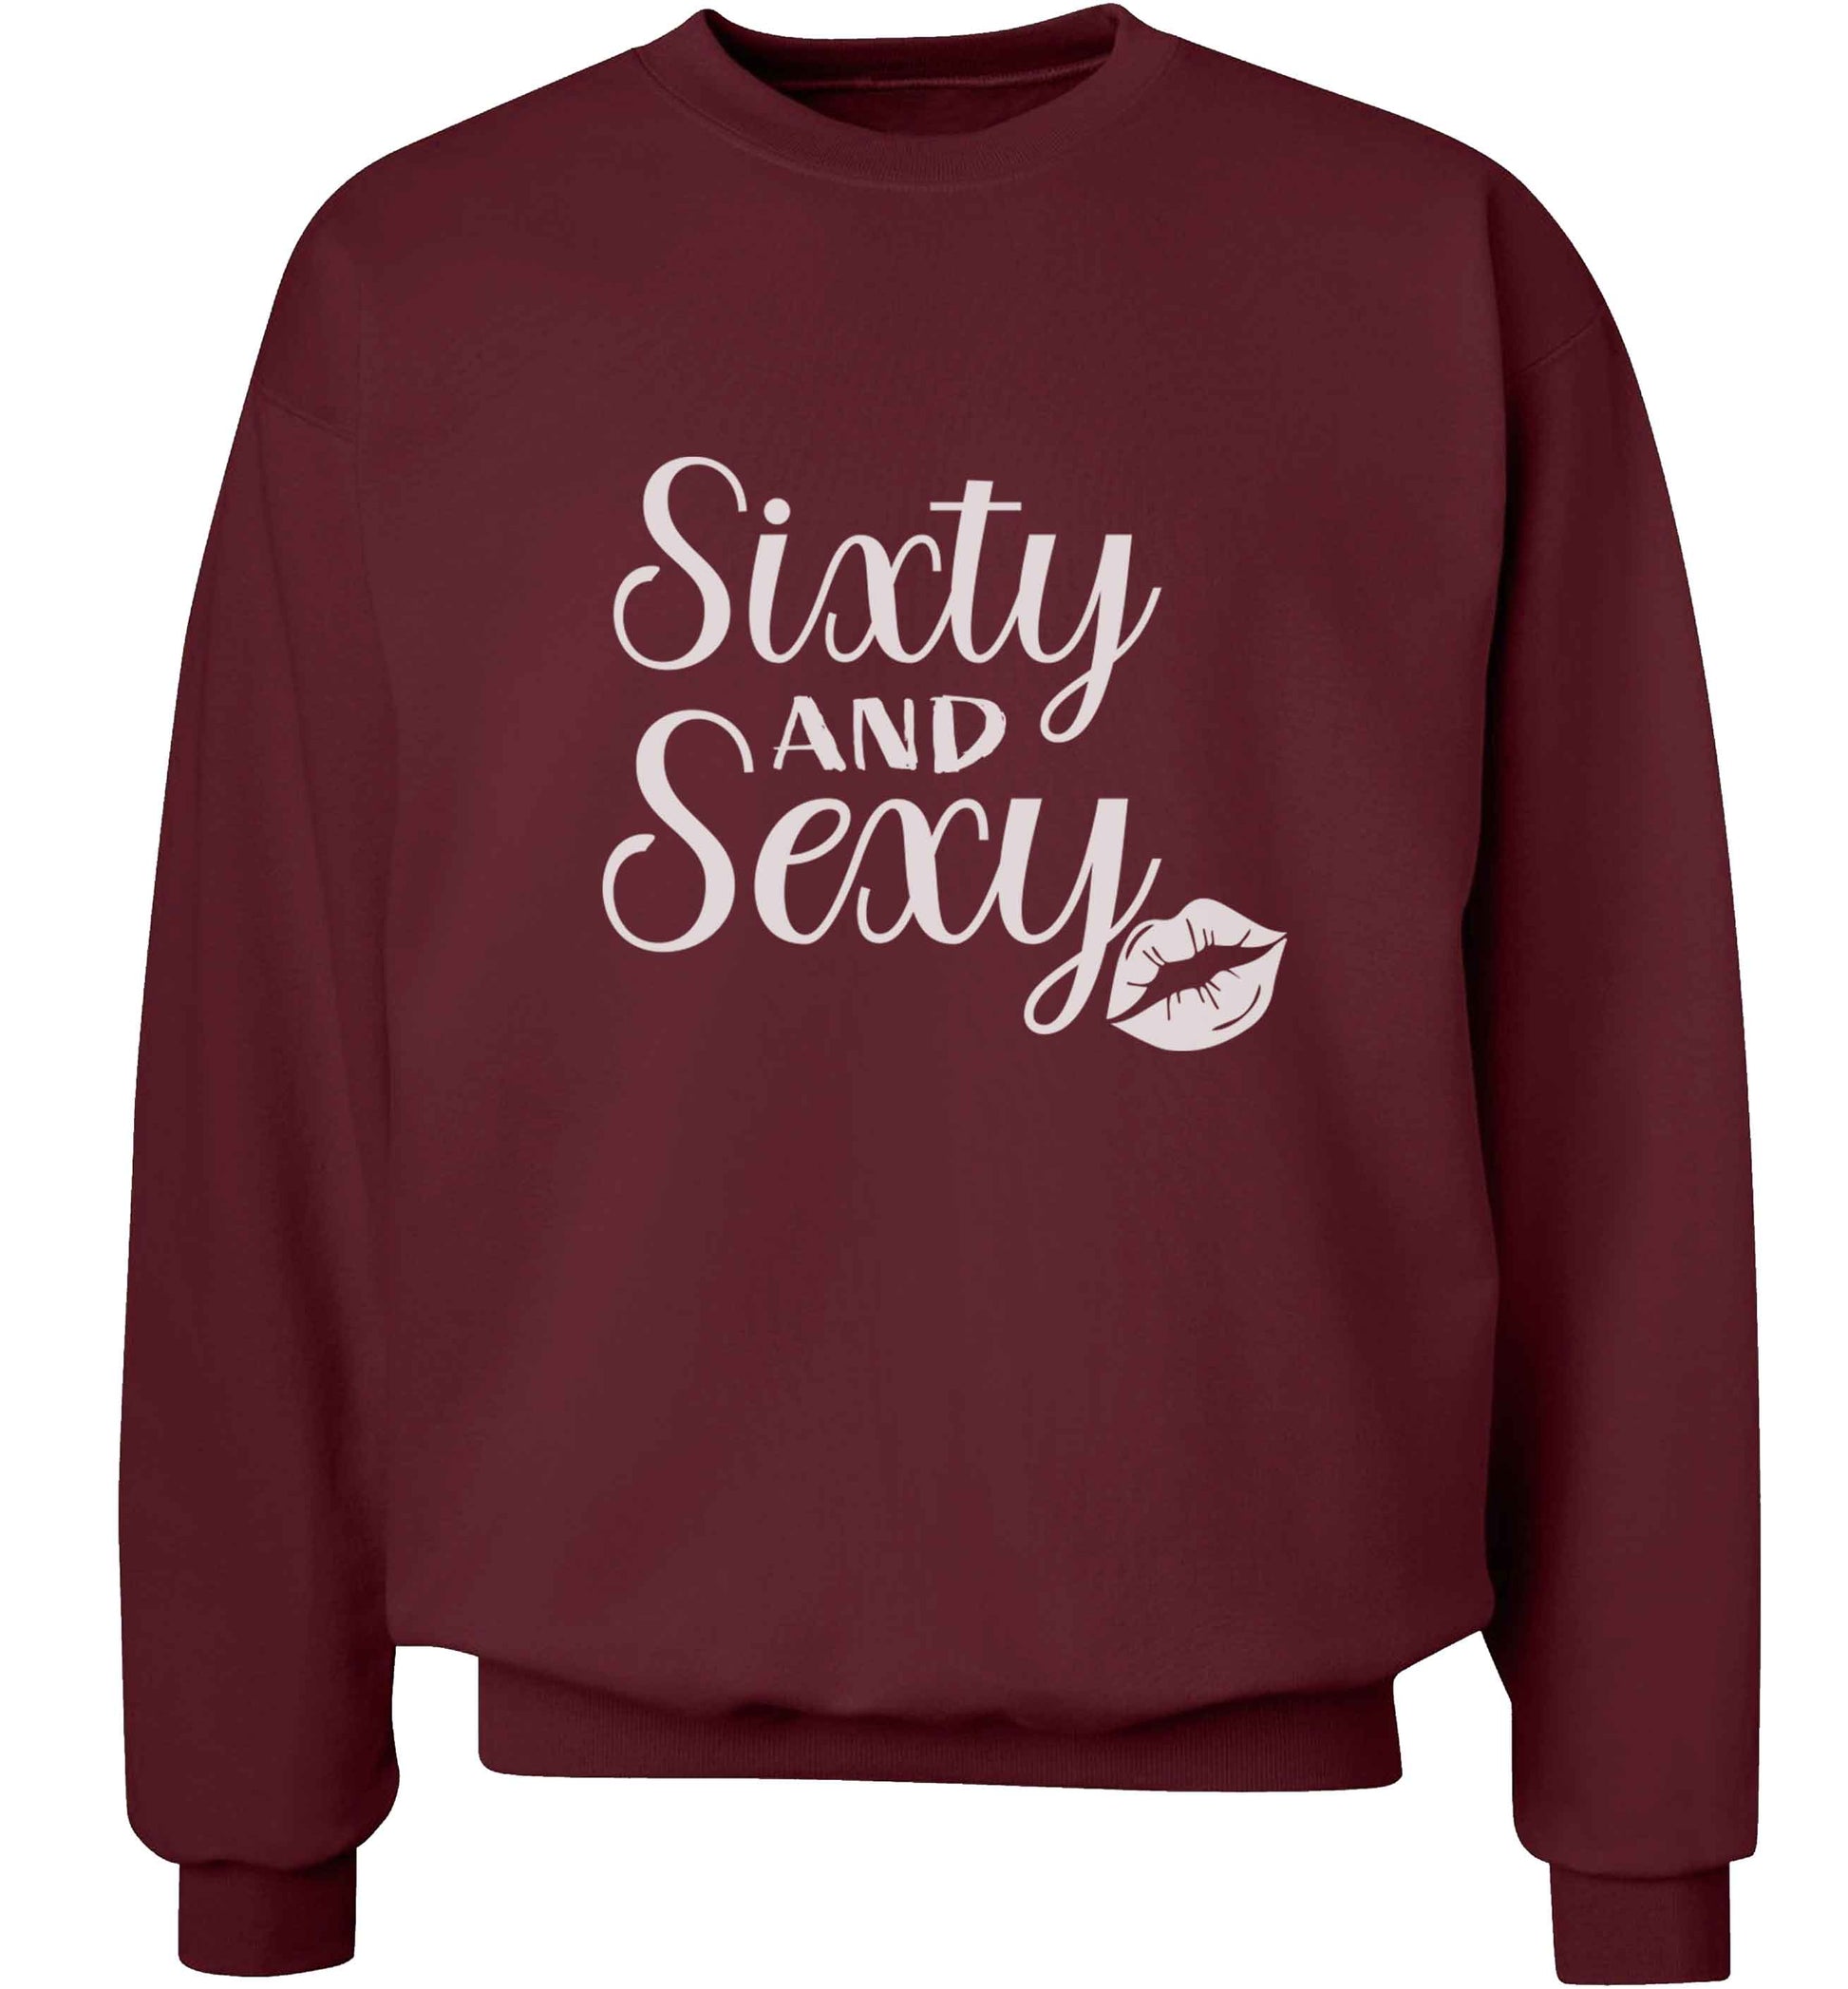 Sixty and sexy adult's unisex maroon sweater 2XL